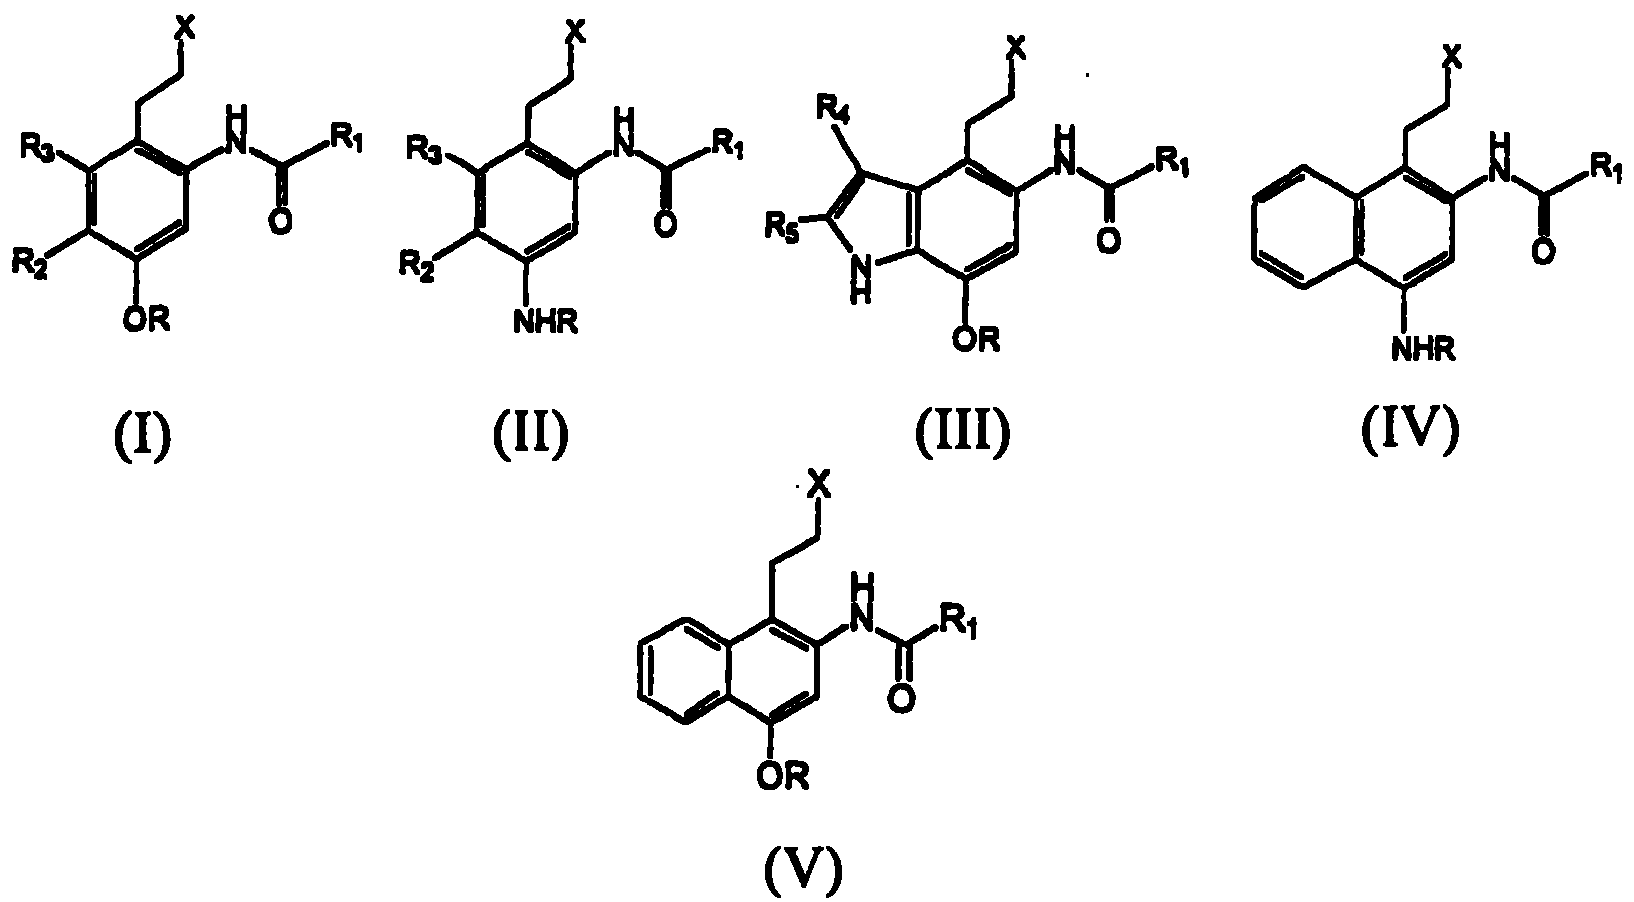 Compositions and methods of use thereof achiral analogues of CC-1065 and duocarmycins